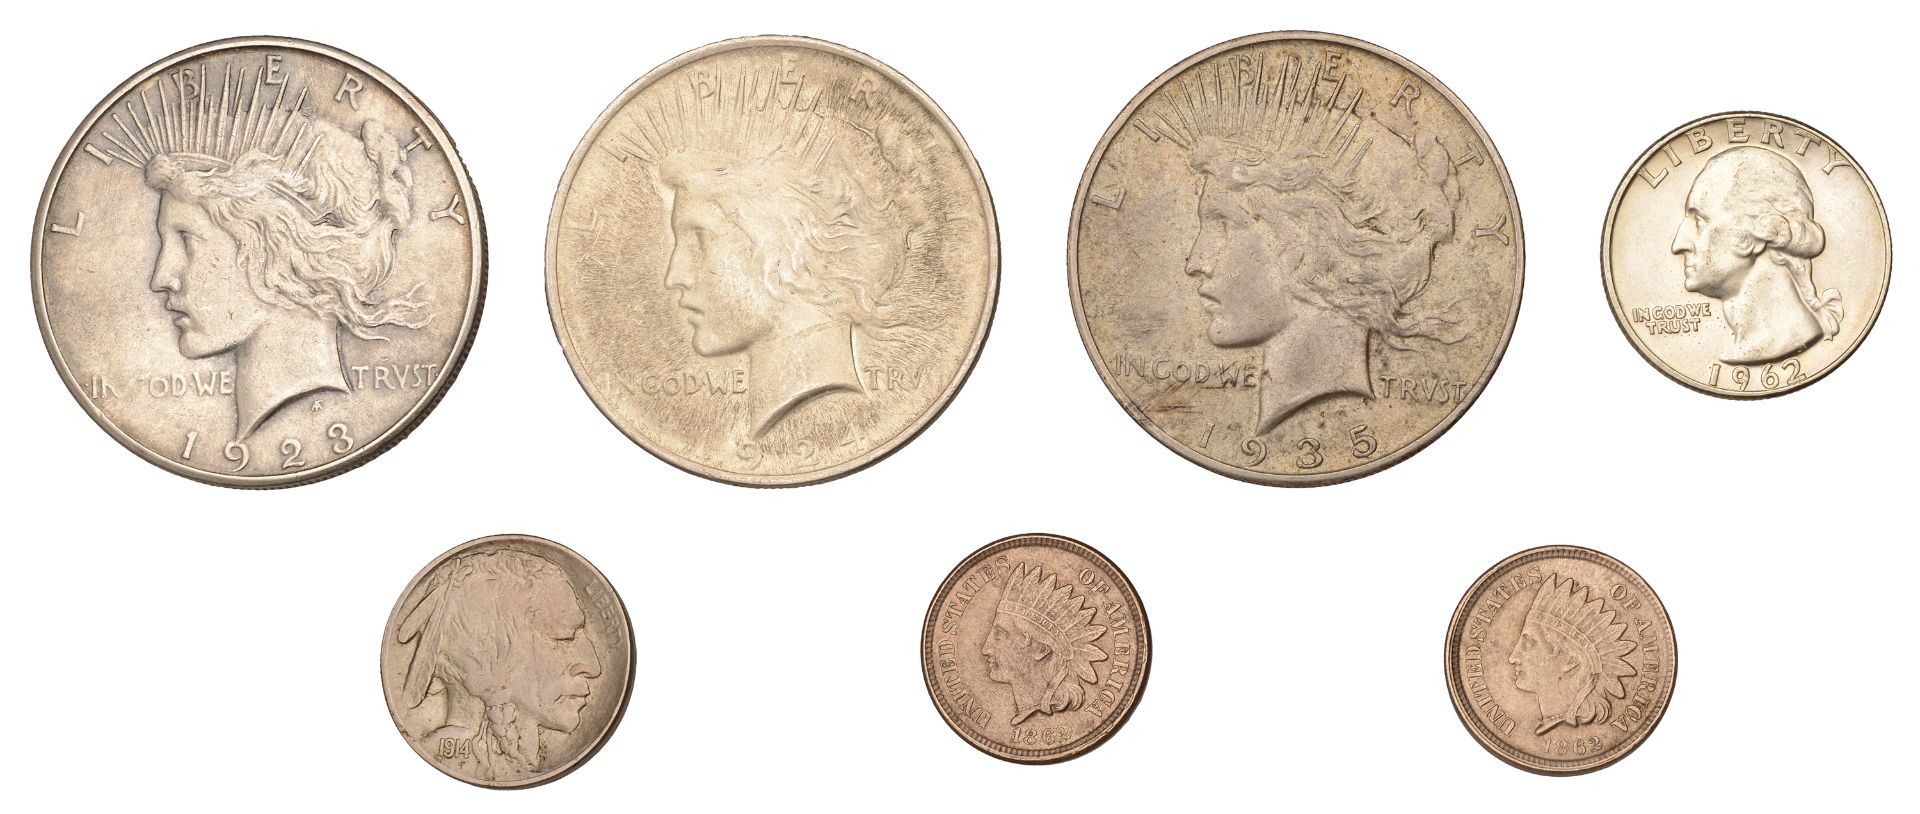 United States of America, Dollars (3), 1923s, 1924, 1935s; Quarter-Dollar, 1962d; Five Cents...